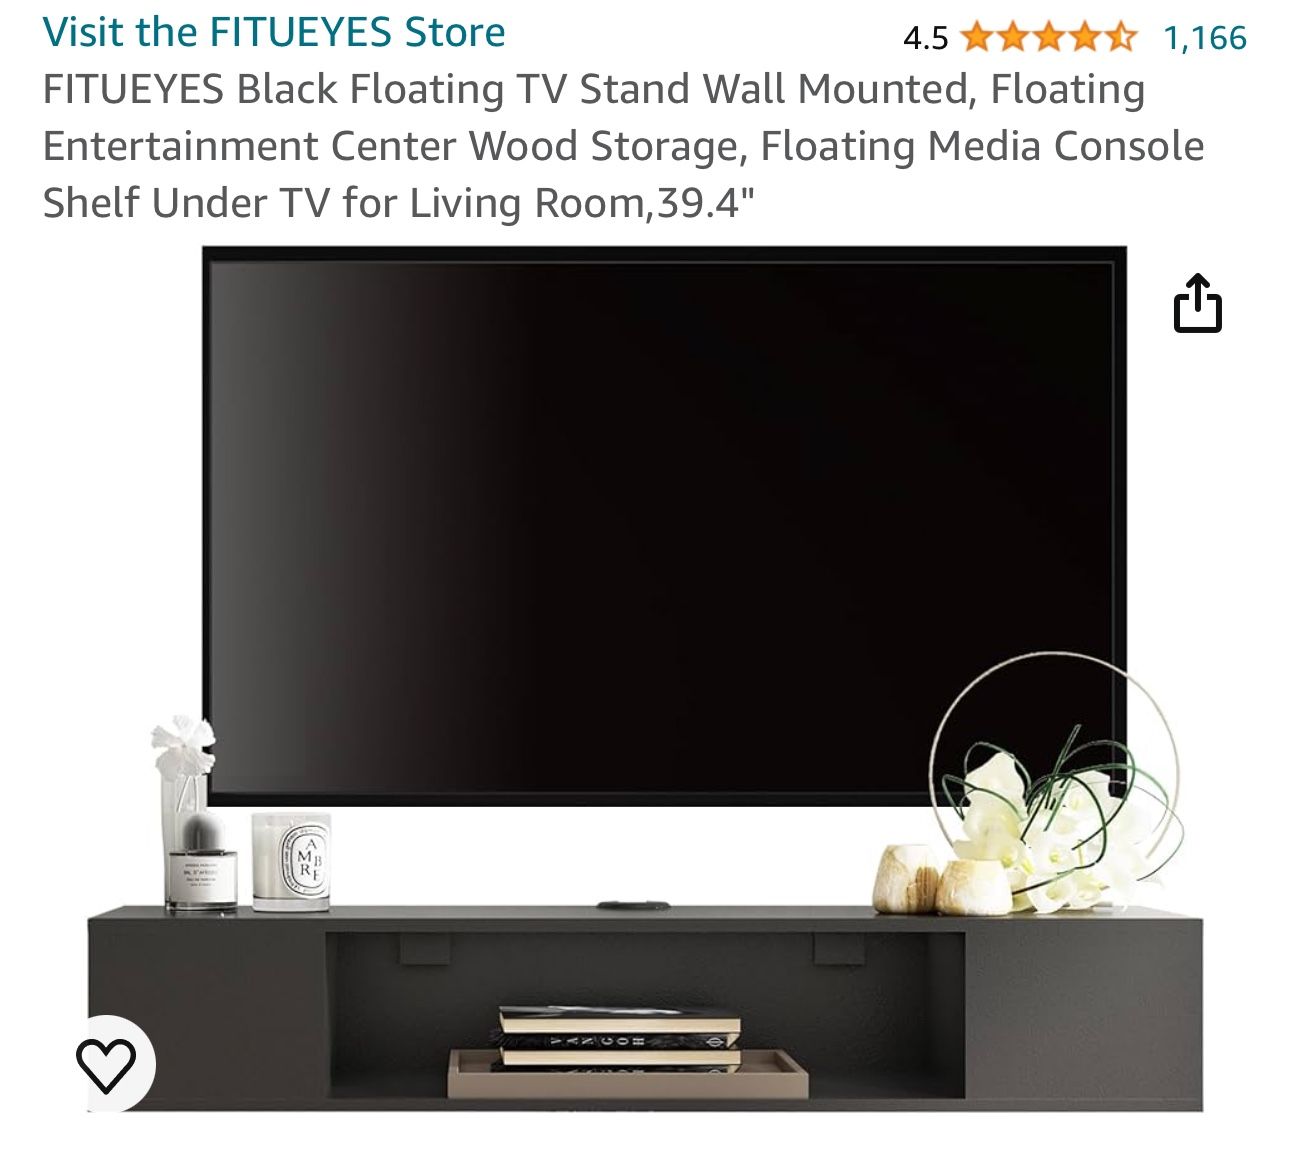  Floating TV Stand Wall Mounted